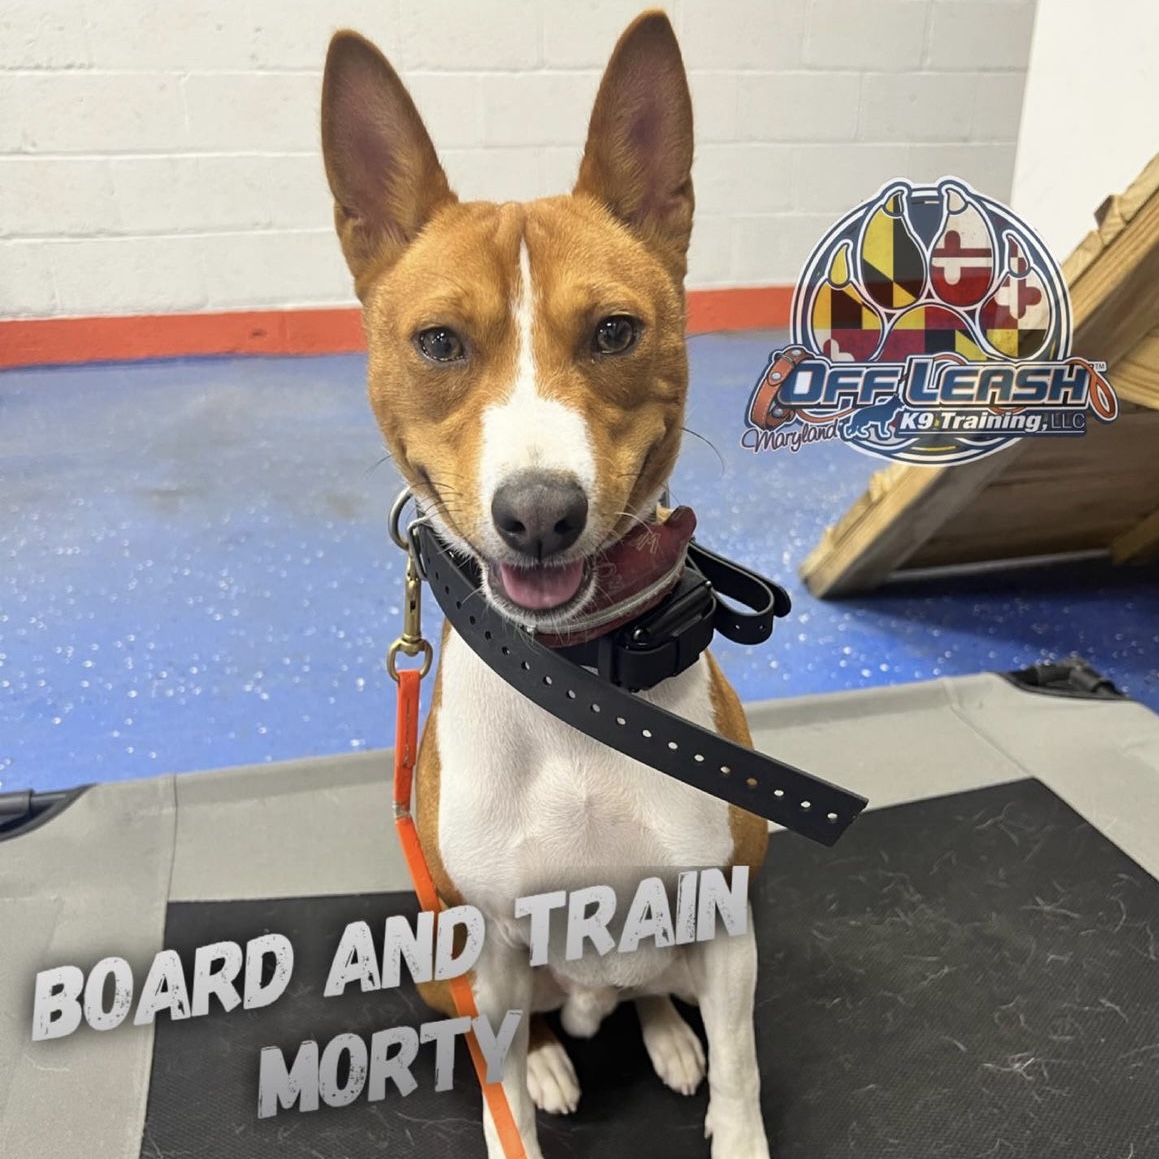 Dog named Morty who completed our 2 week board and train dog training